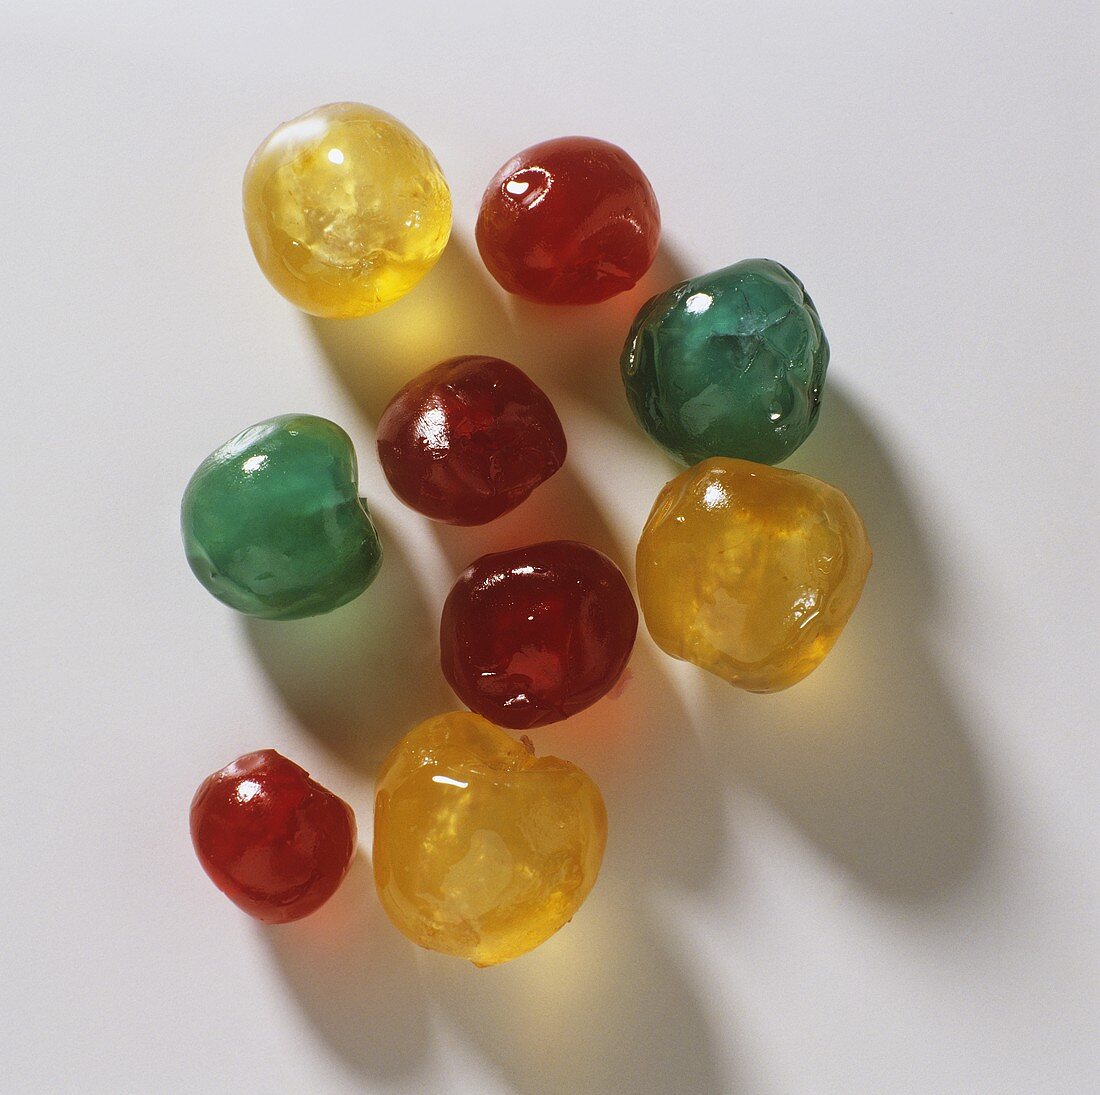 Red, yellow and green candied cherries